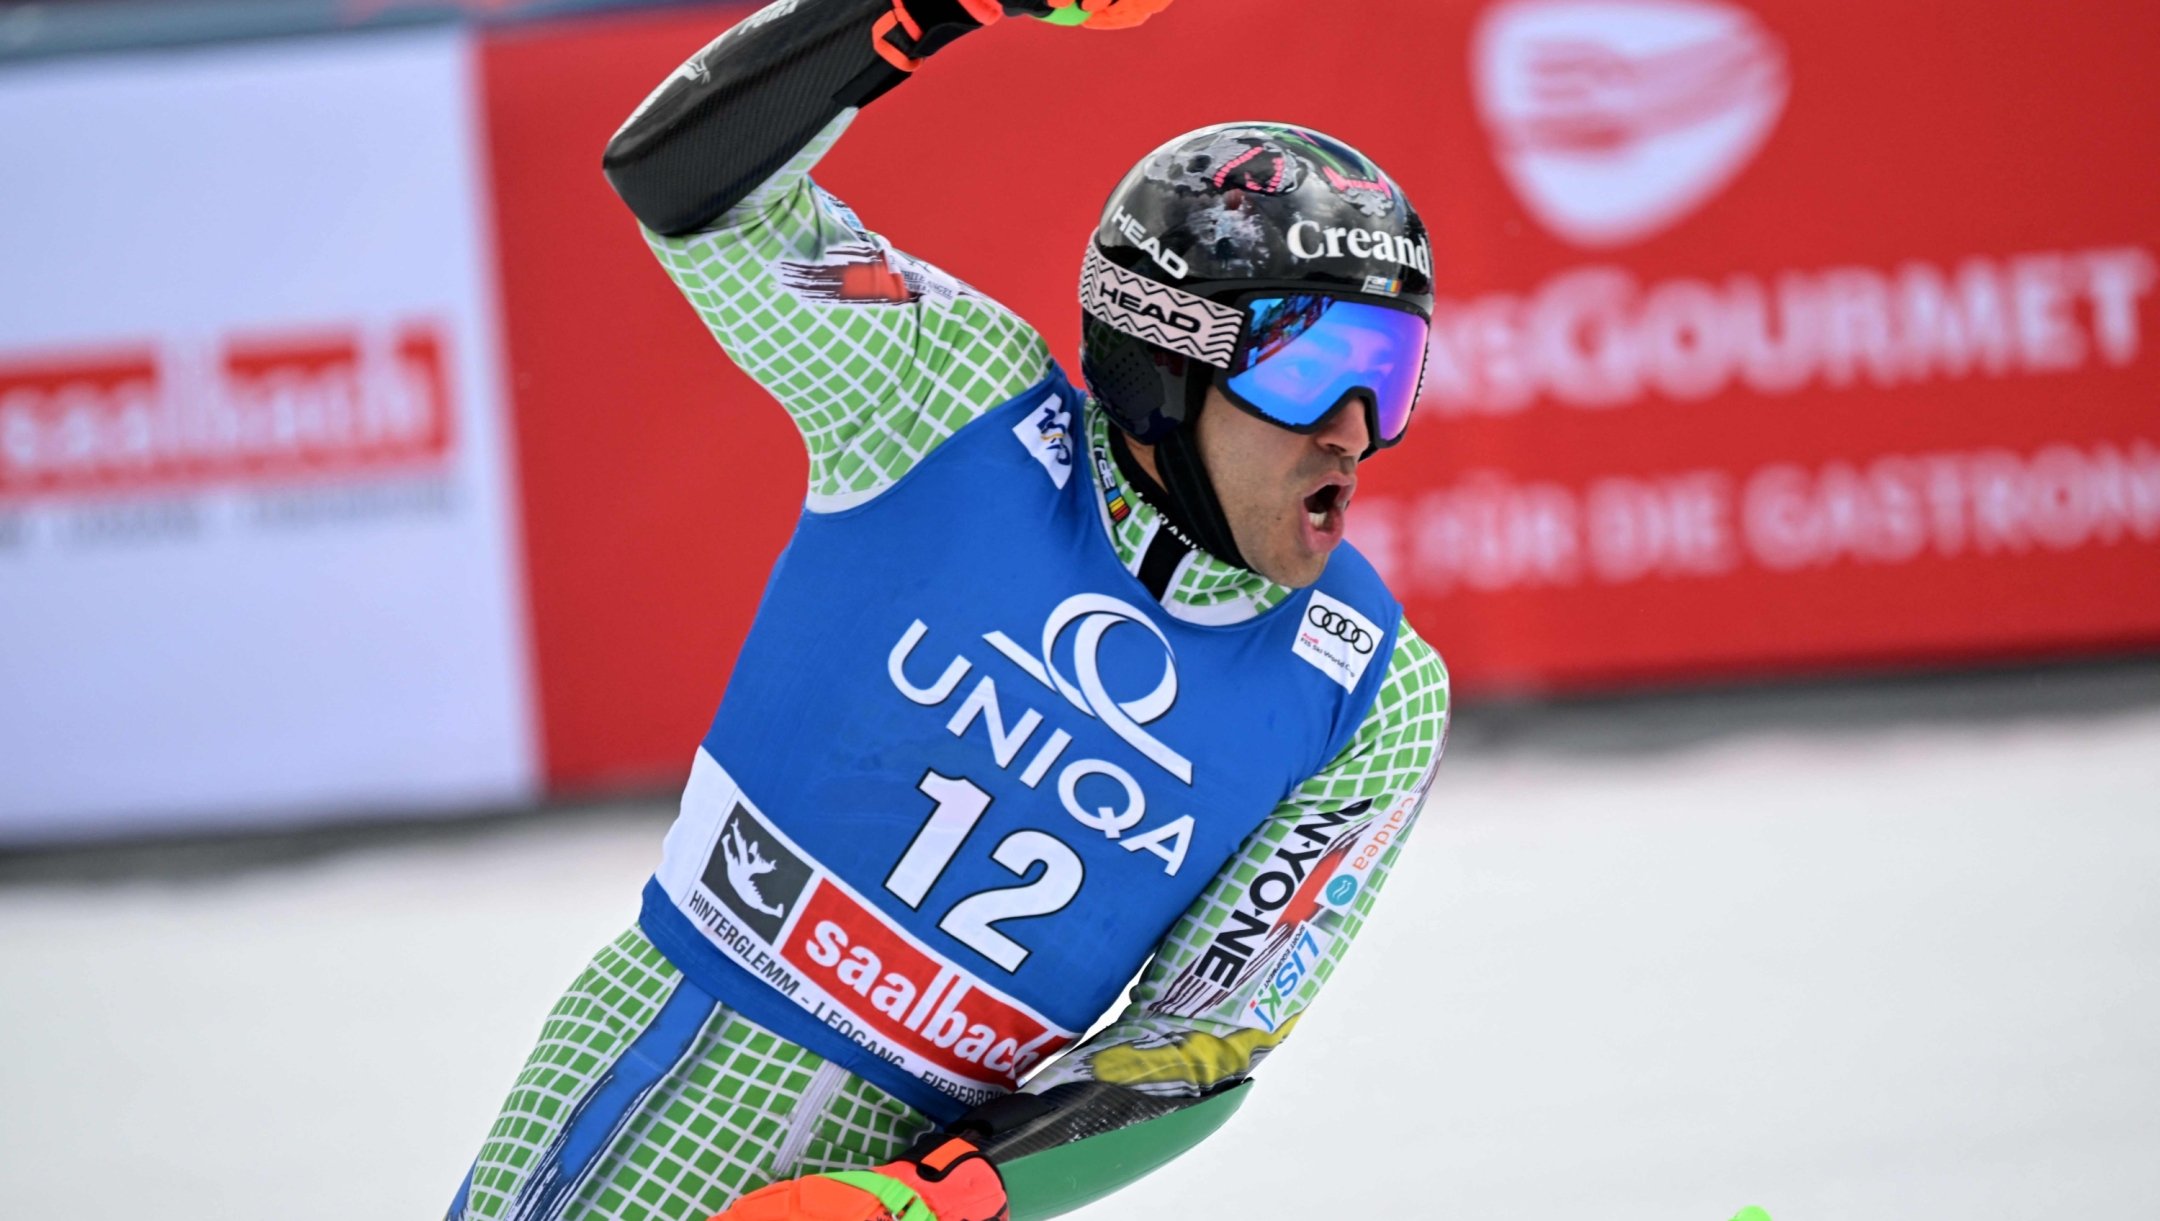 Andorra's Joan Verdu reacts after his second run of the men's Giant Slalom event of FIS Ski Alpine World Cup in Saalbach, Austria on March 16, 2024. (Photo by Joe Klamar / AFP)